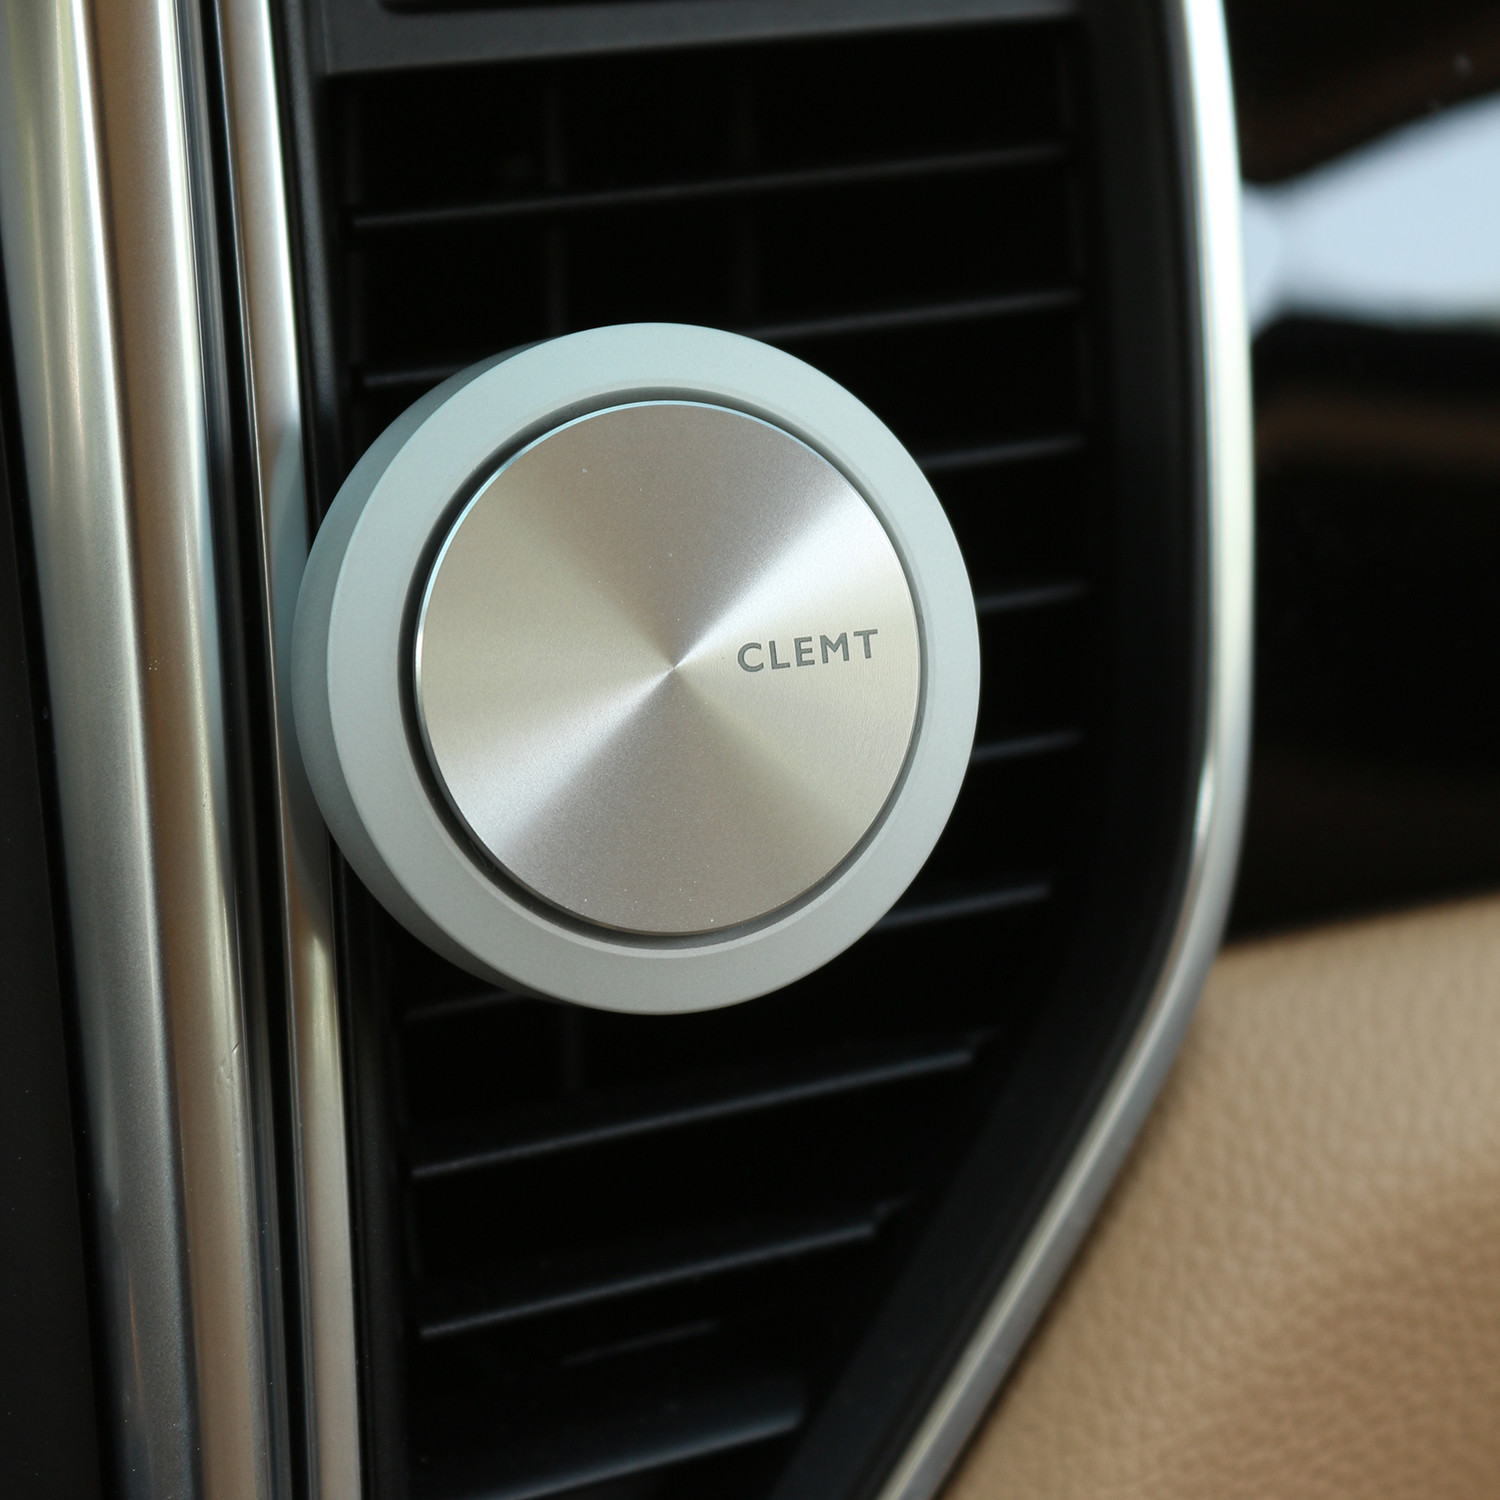 CLEMT Car Diffuser Mini - Luxury Vehicle Air Freshener with